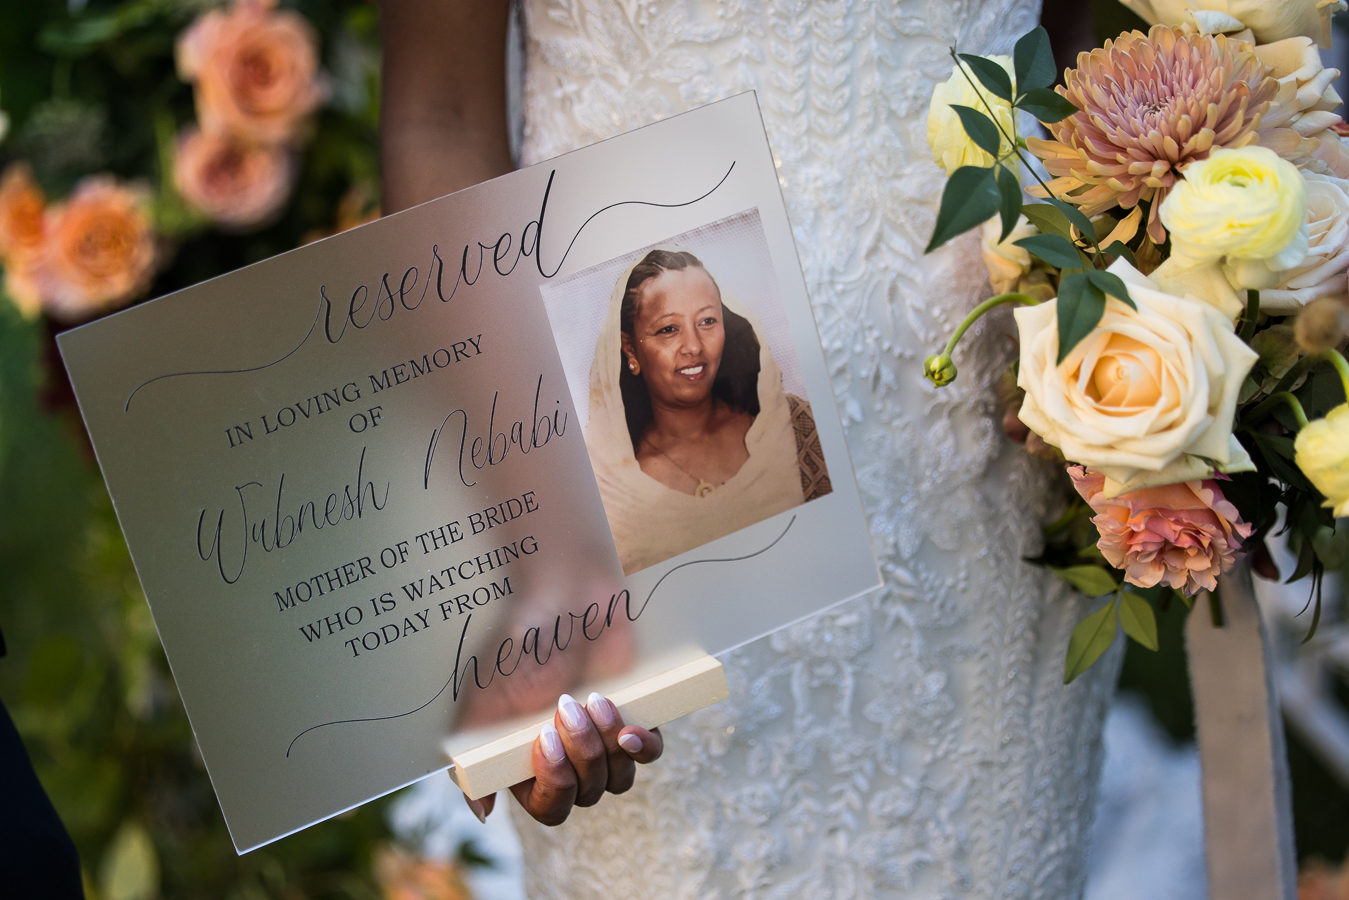 dc wedding photographer, Lisa rhinehart, captures this sentimental image of the bride as she holds the reserved sign in memory of her mom who passed away before her Multicultural DC Wedding at st francis hall 